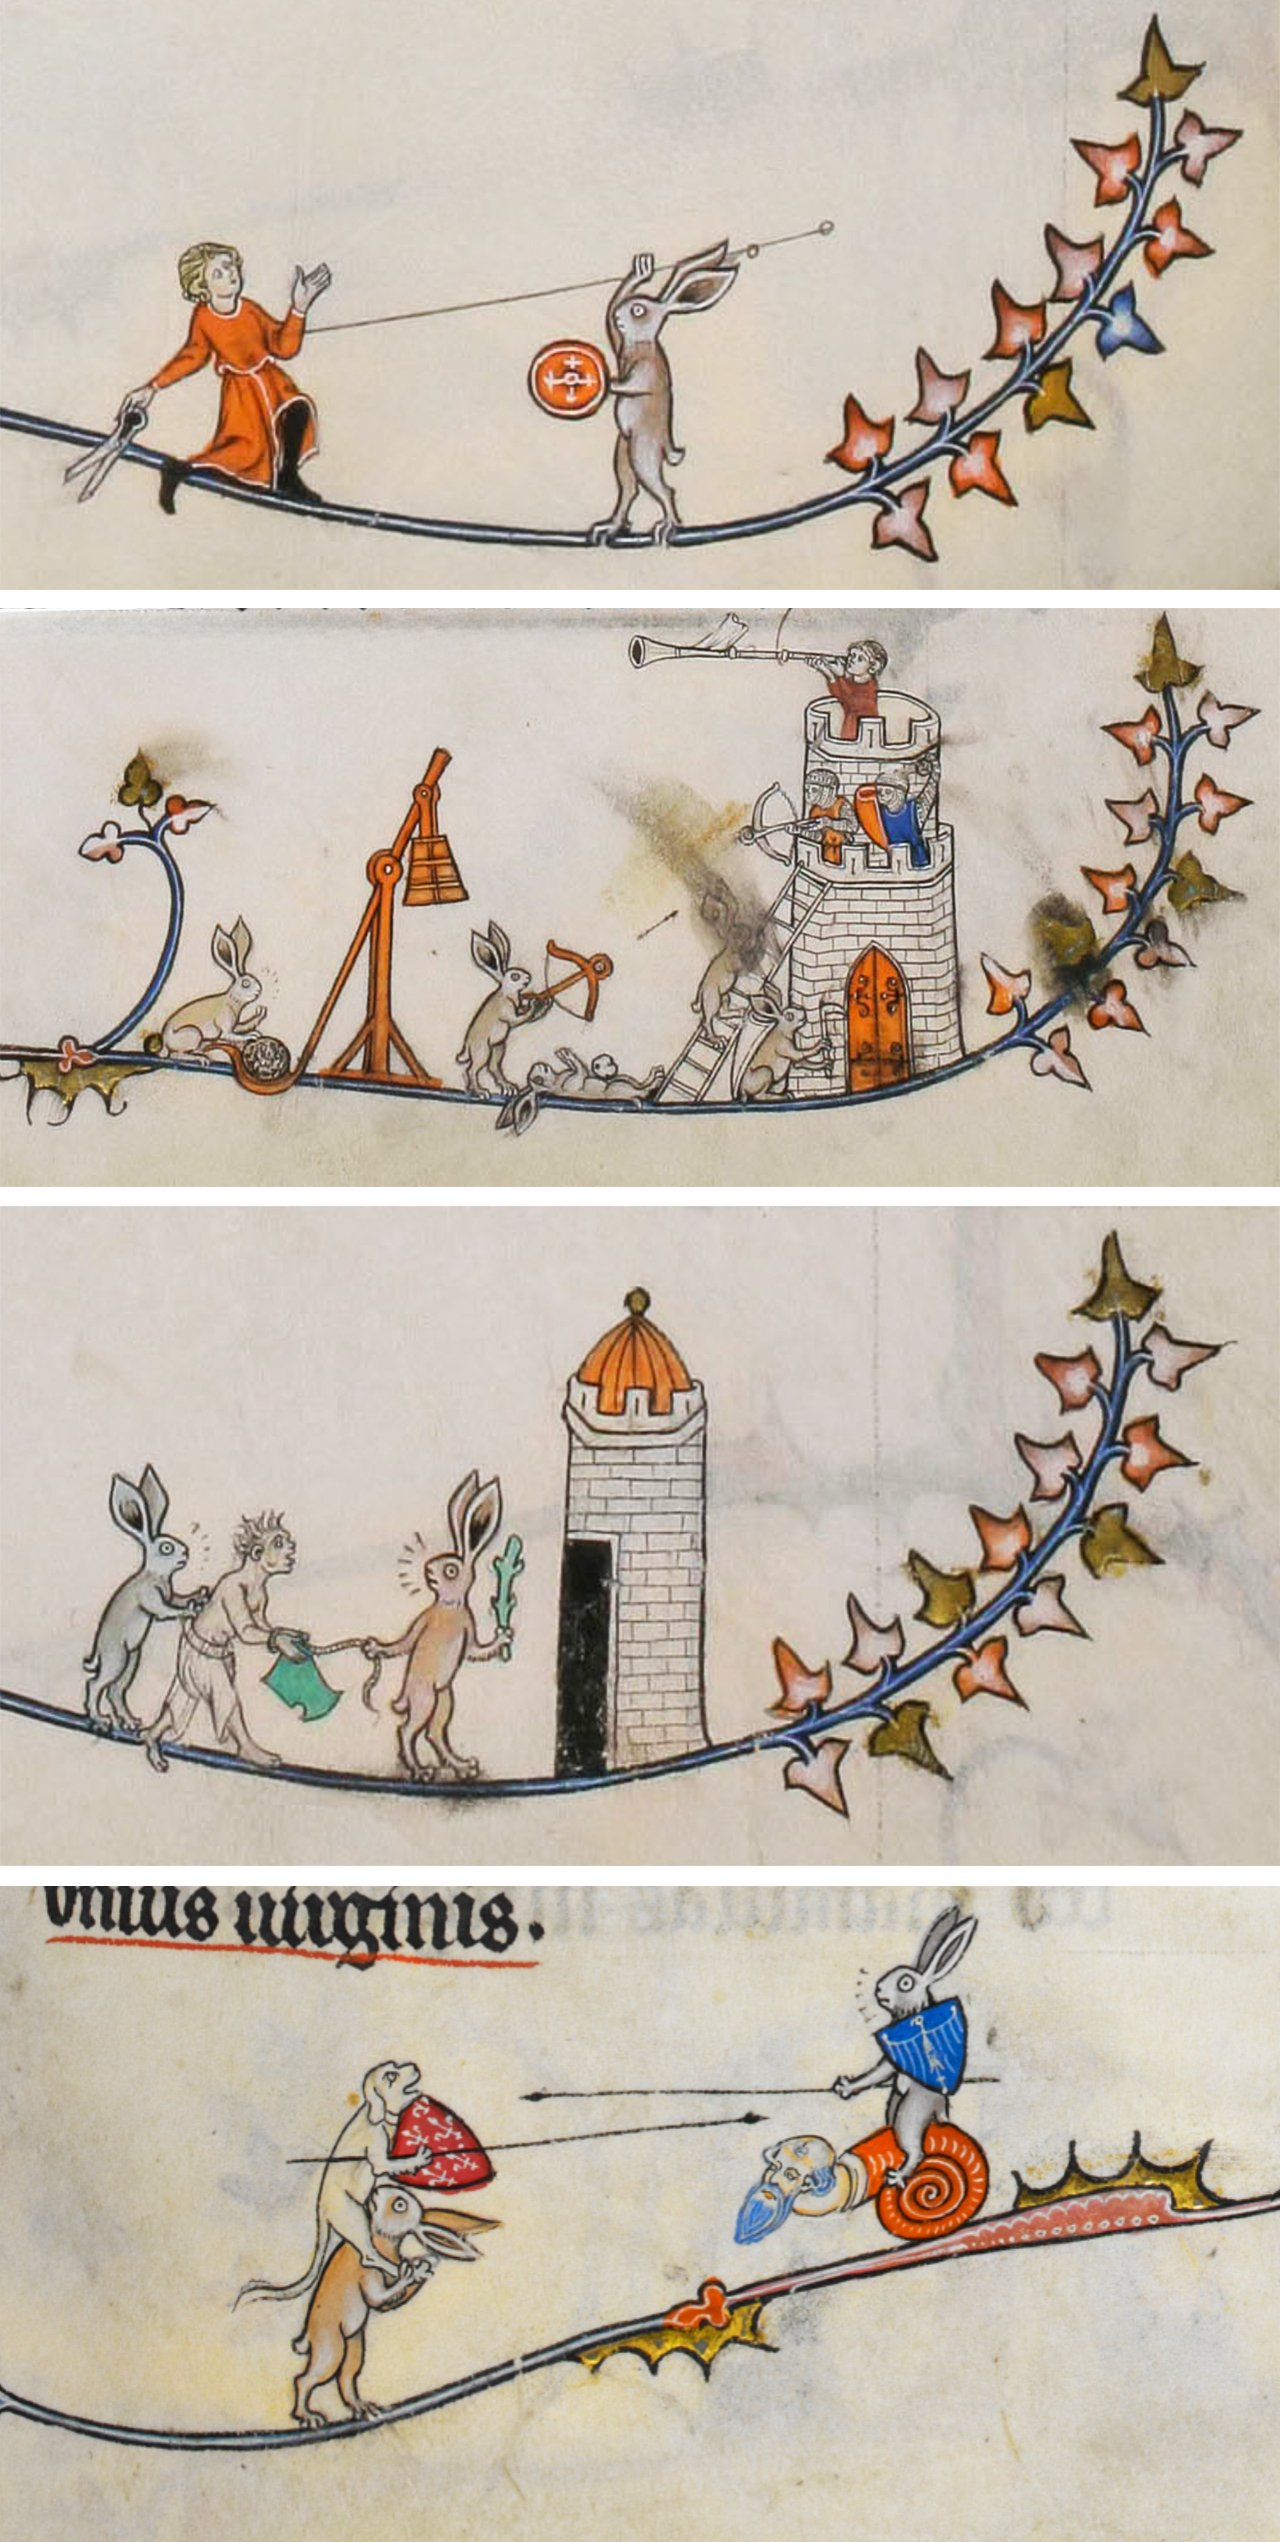 Collage of four images: 1. Spear-wielding rabbit confronting a man with shears. 2. Armored rabbits using a siege engine to assault a tower defended by knights. 3. Two rabbits apprehend a man, leading him to a cell. 4. A rabbit riding a man-snail confronts a hound atop a perplexed rabbit.